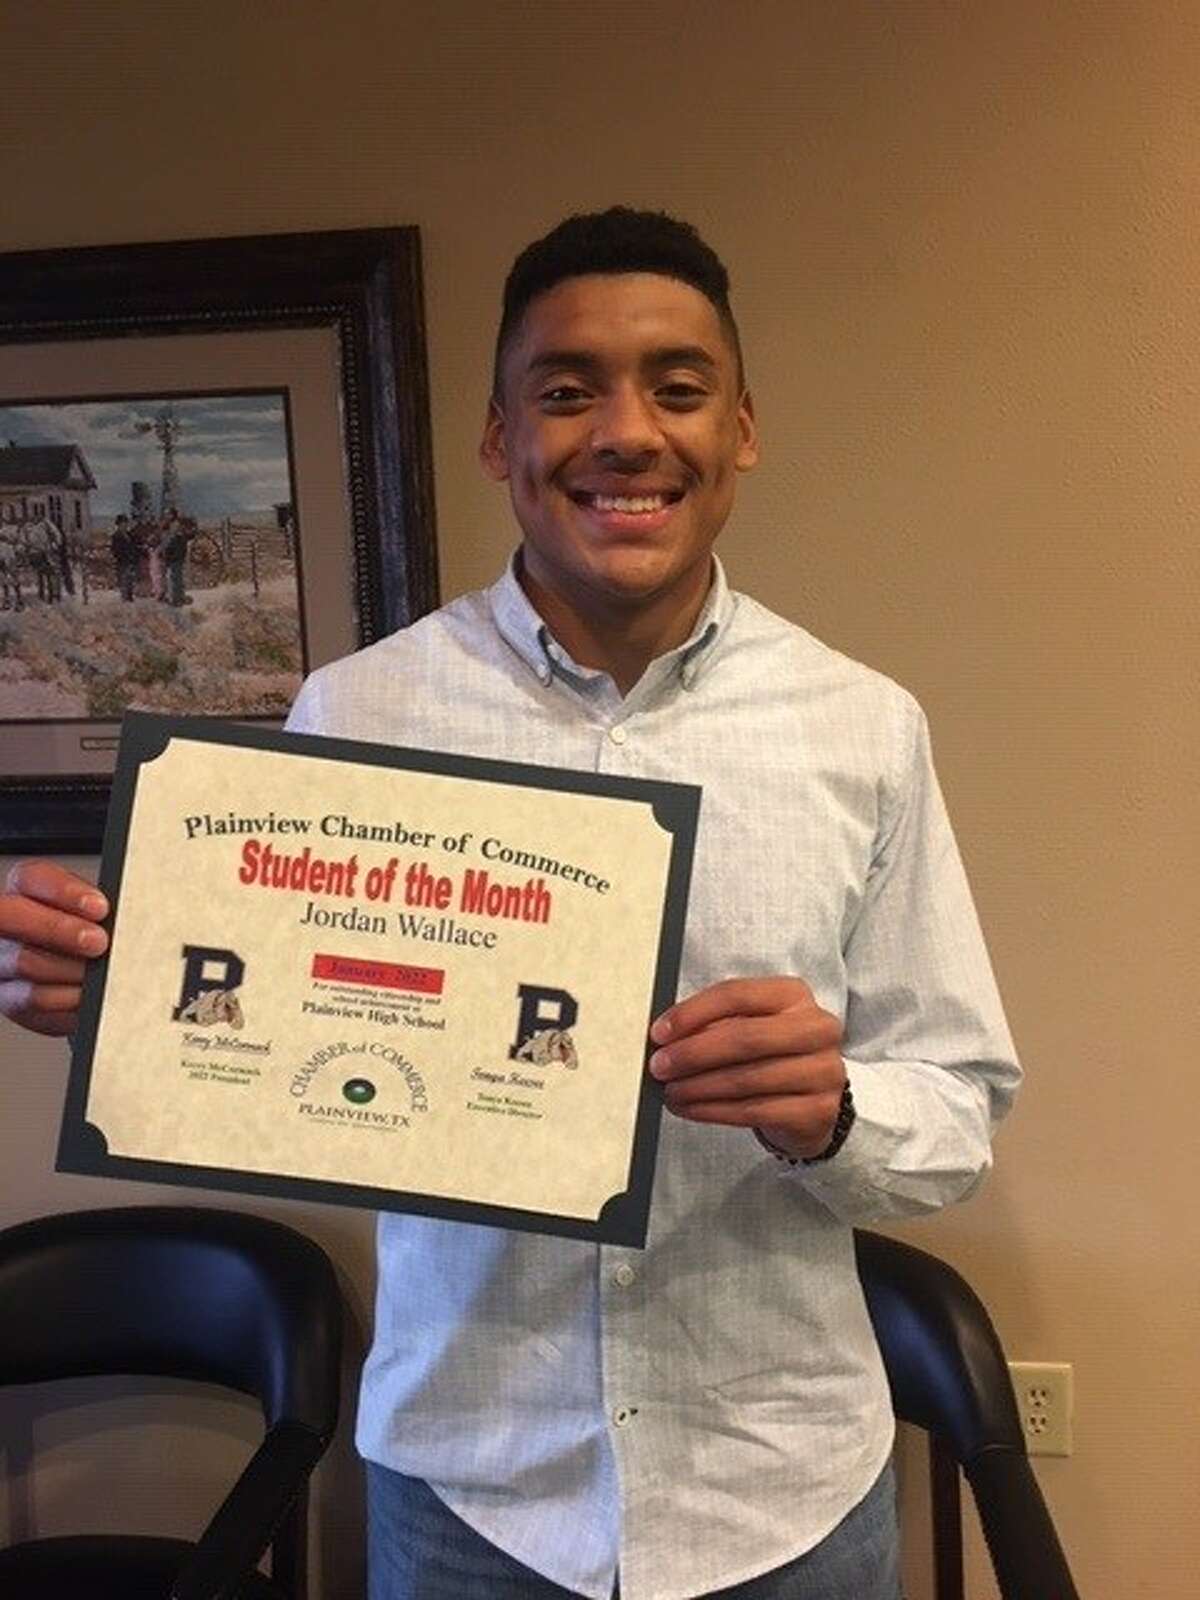 Jordan Wallace was recognized this week as the Chamber's Student of the Month for January 2022.